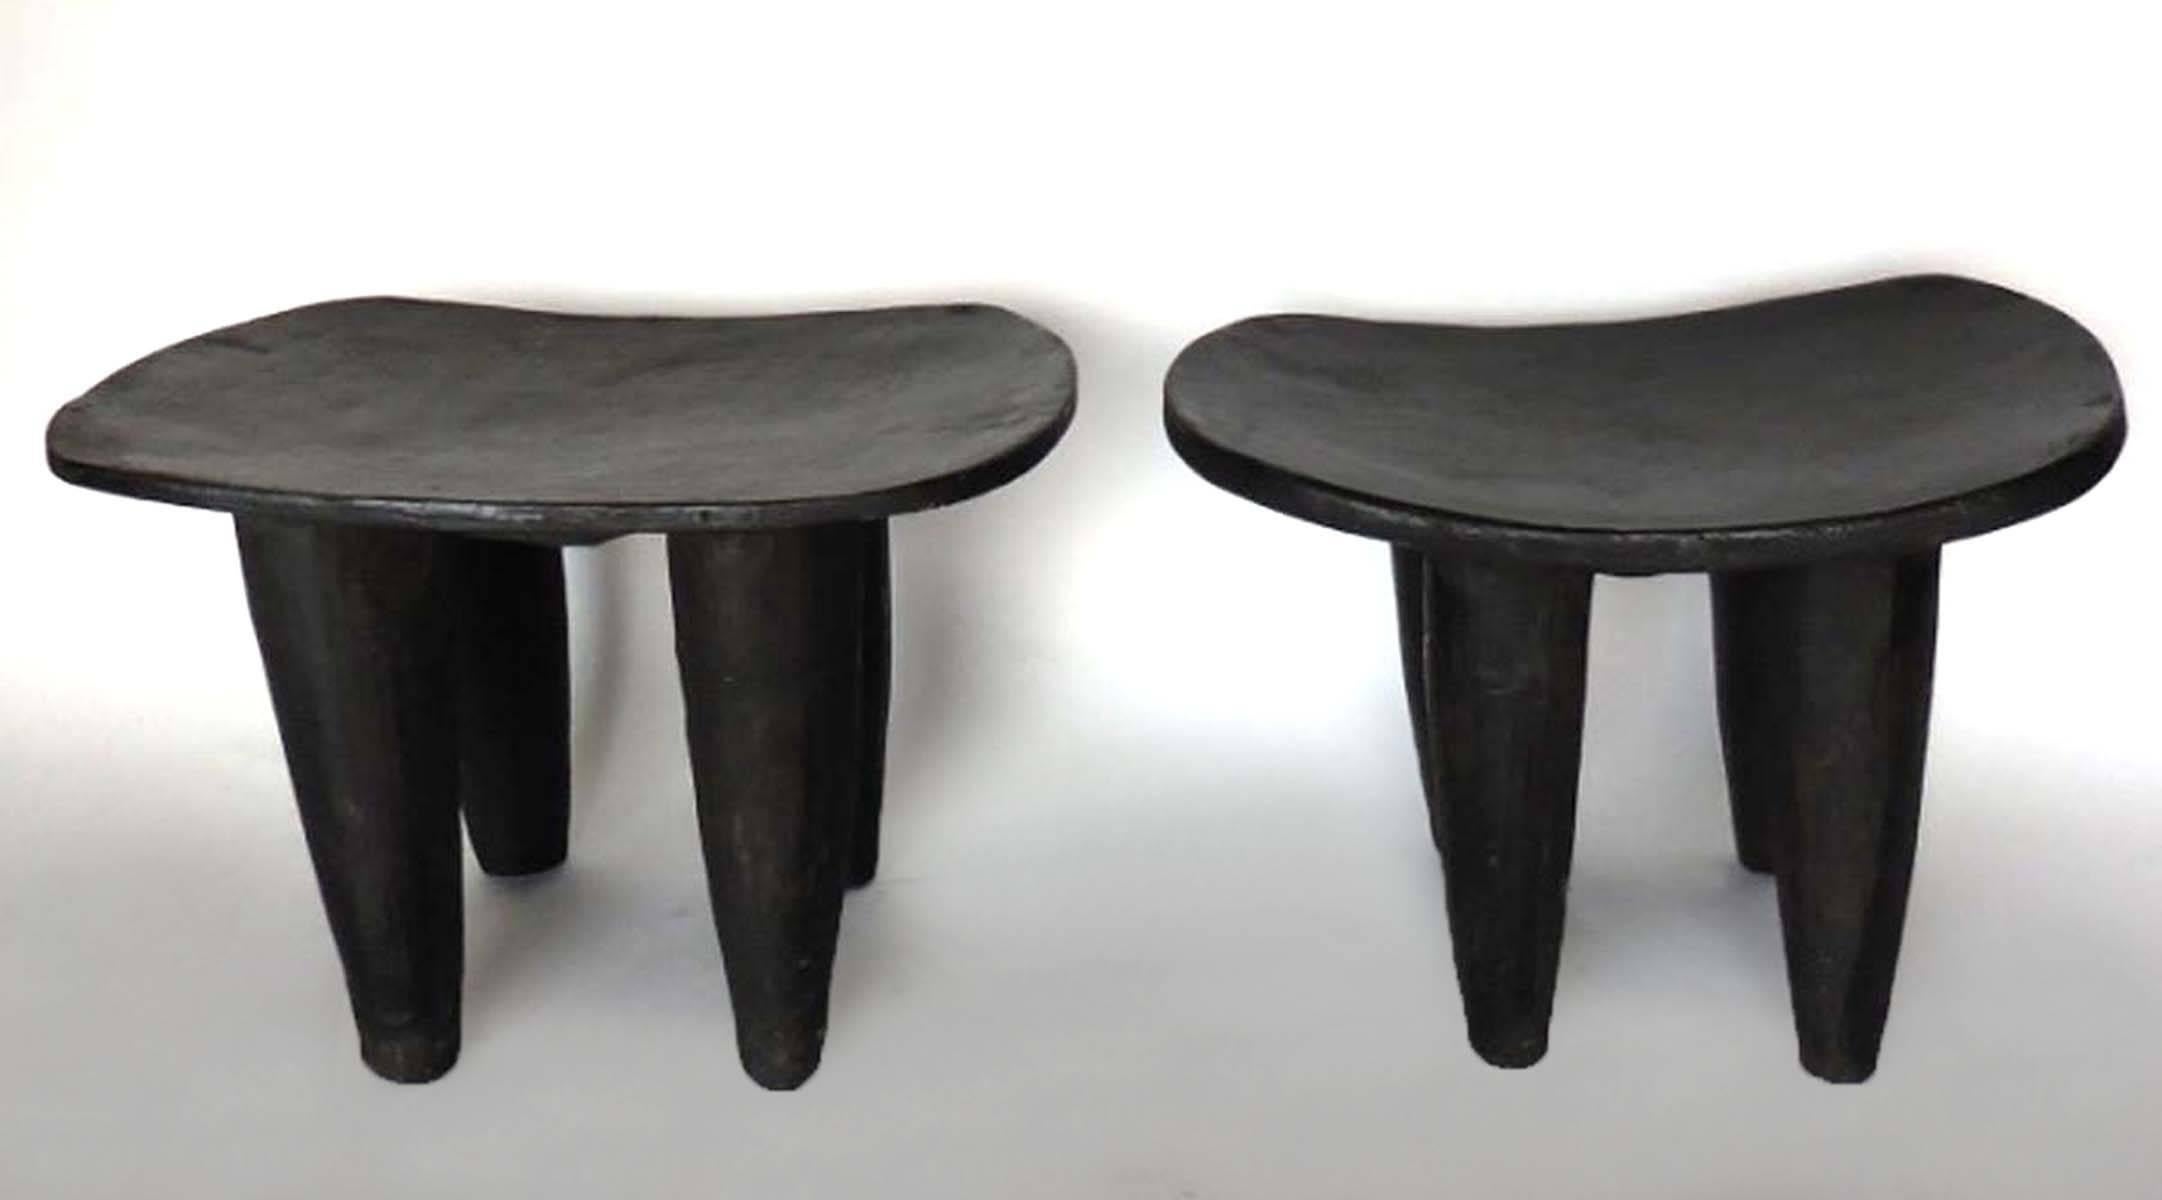 Vintage, hand-carved iroko wood stool or small table from the Senufo tribe in Mali, Africa. Soft and smooth patina. Comfortable to sit on or perfect as a side table. ONLY THE STOOL TO THE RIGHT IS AVAILABLE. 
Right measures 25.25 x 18.5 x 19.5 H.